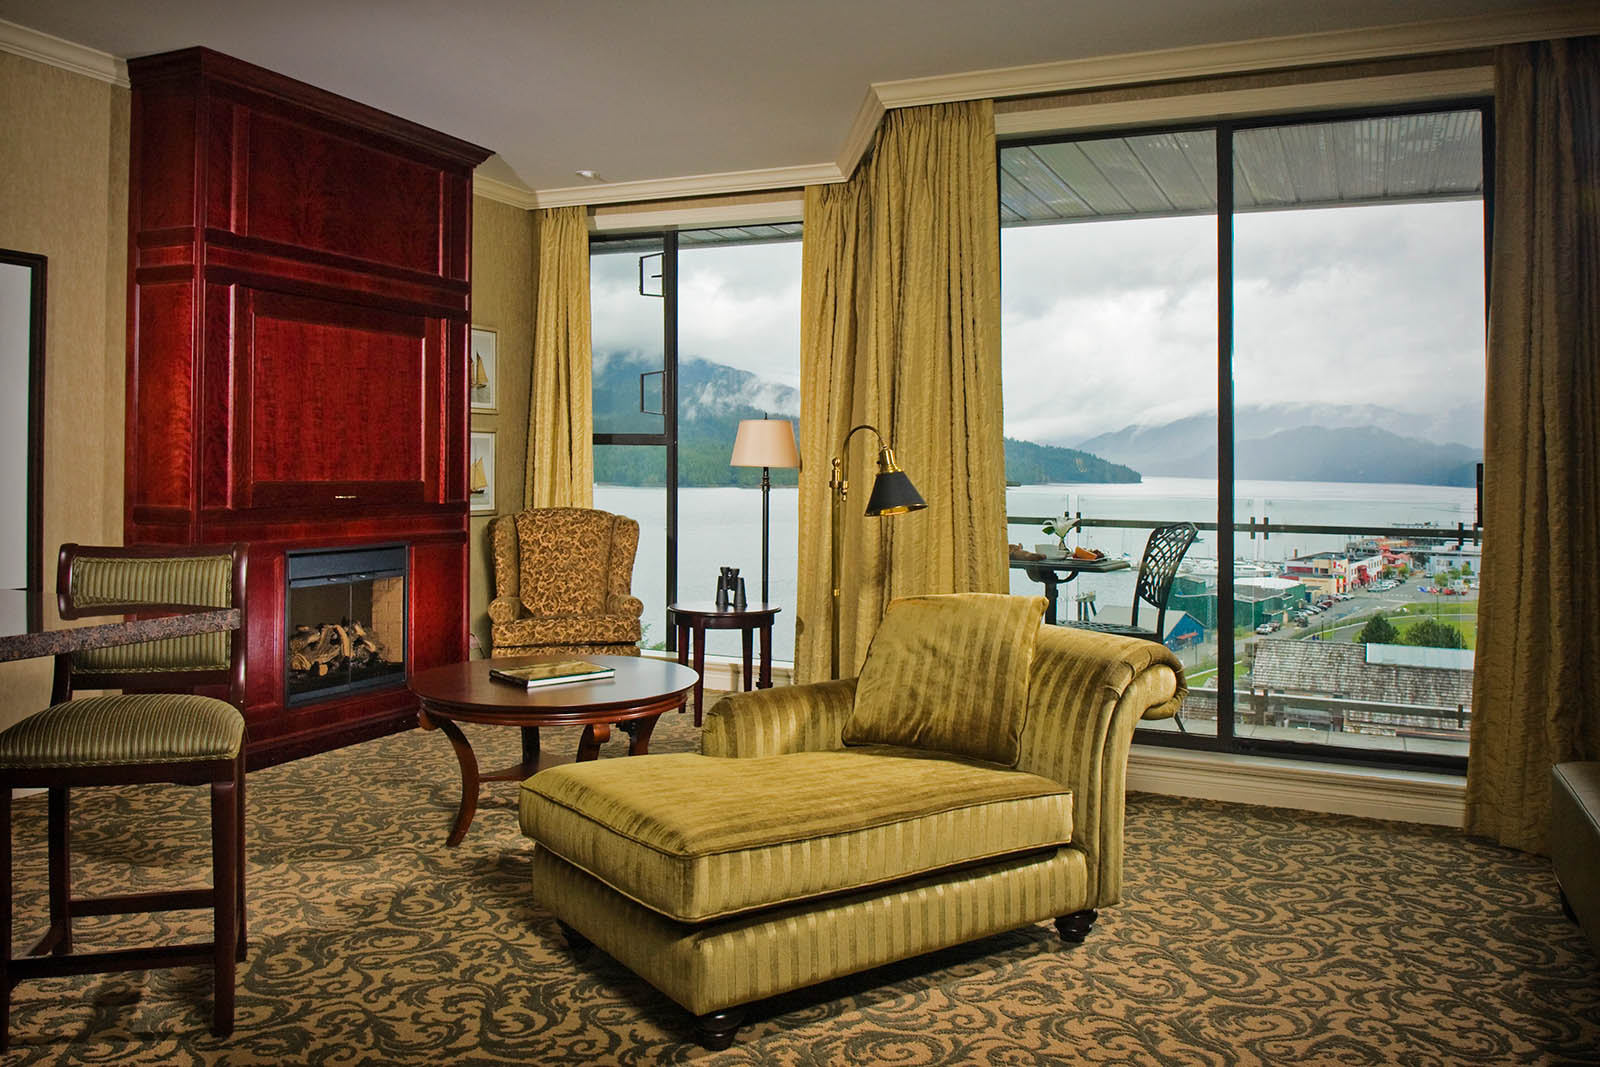 Interior of Crest Hotel room with ocean view